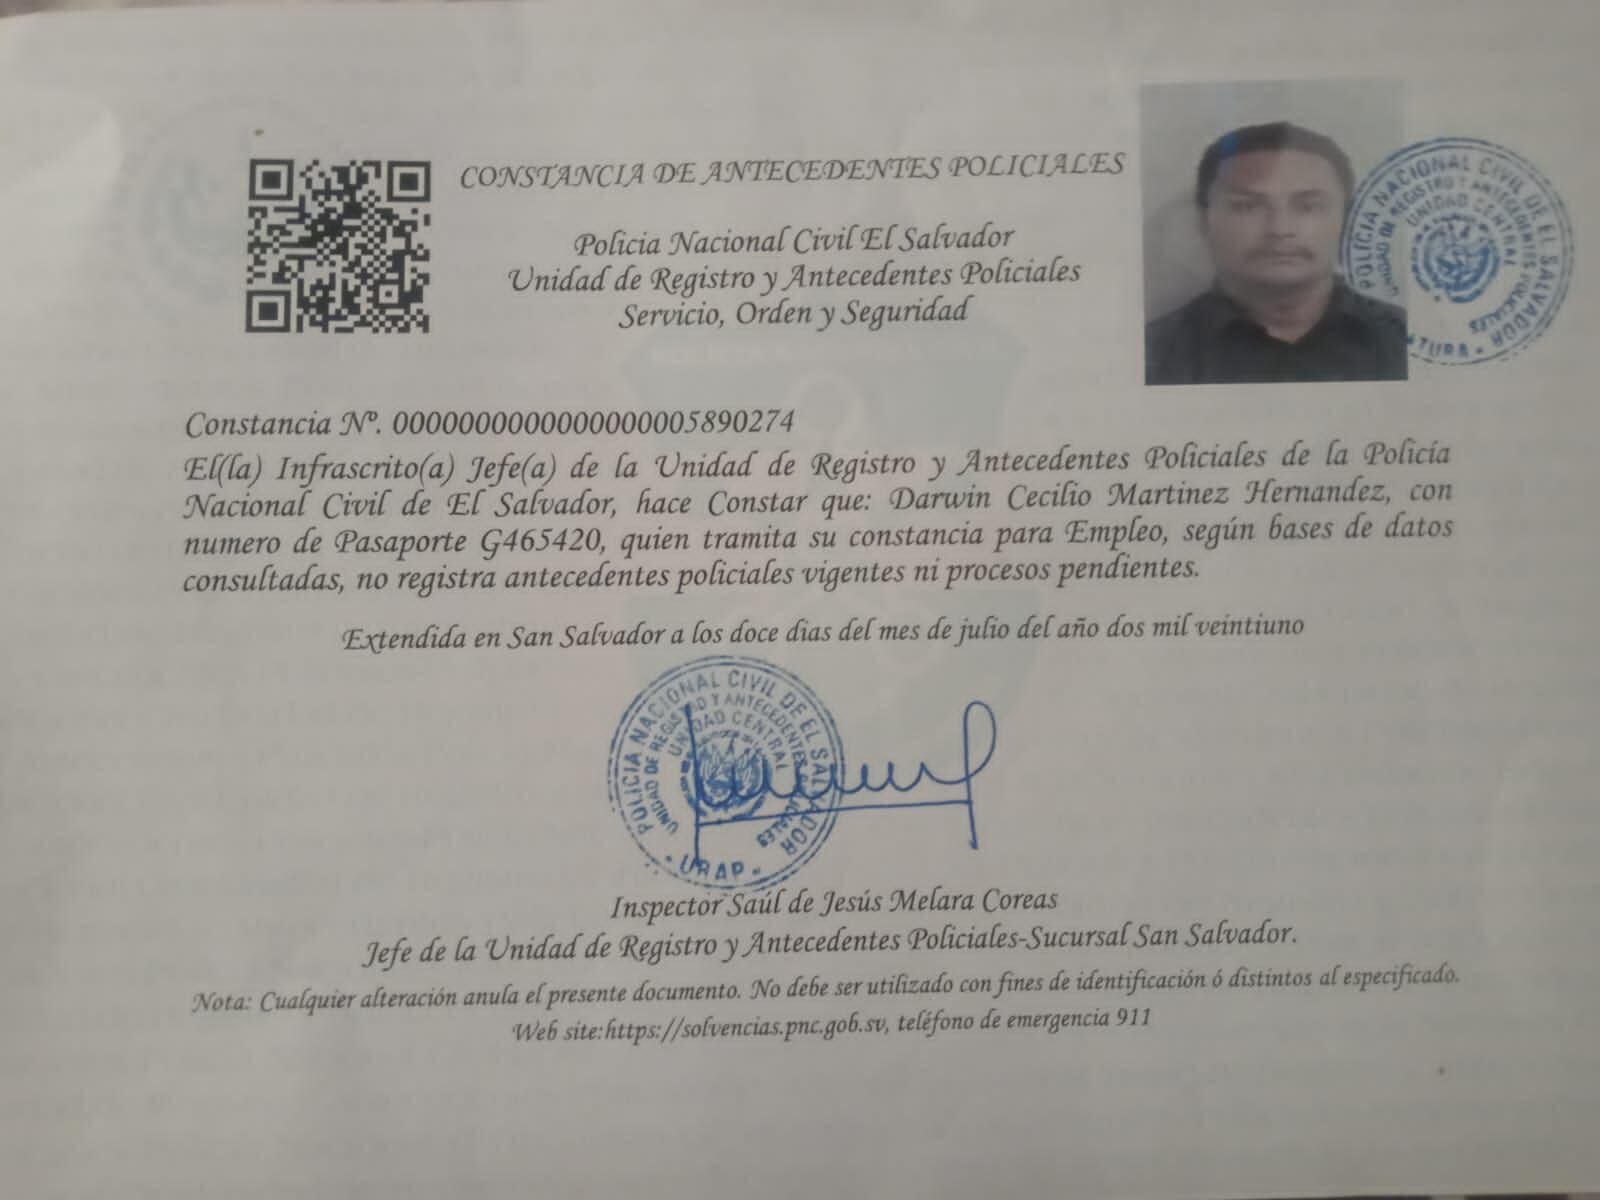 The registry certifies that Martínez does not have 